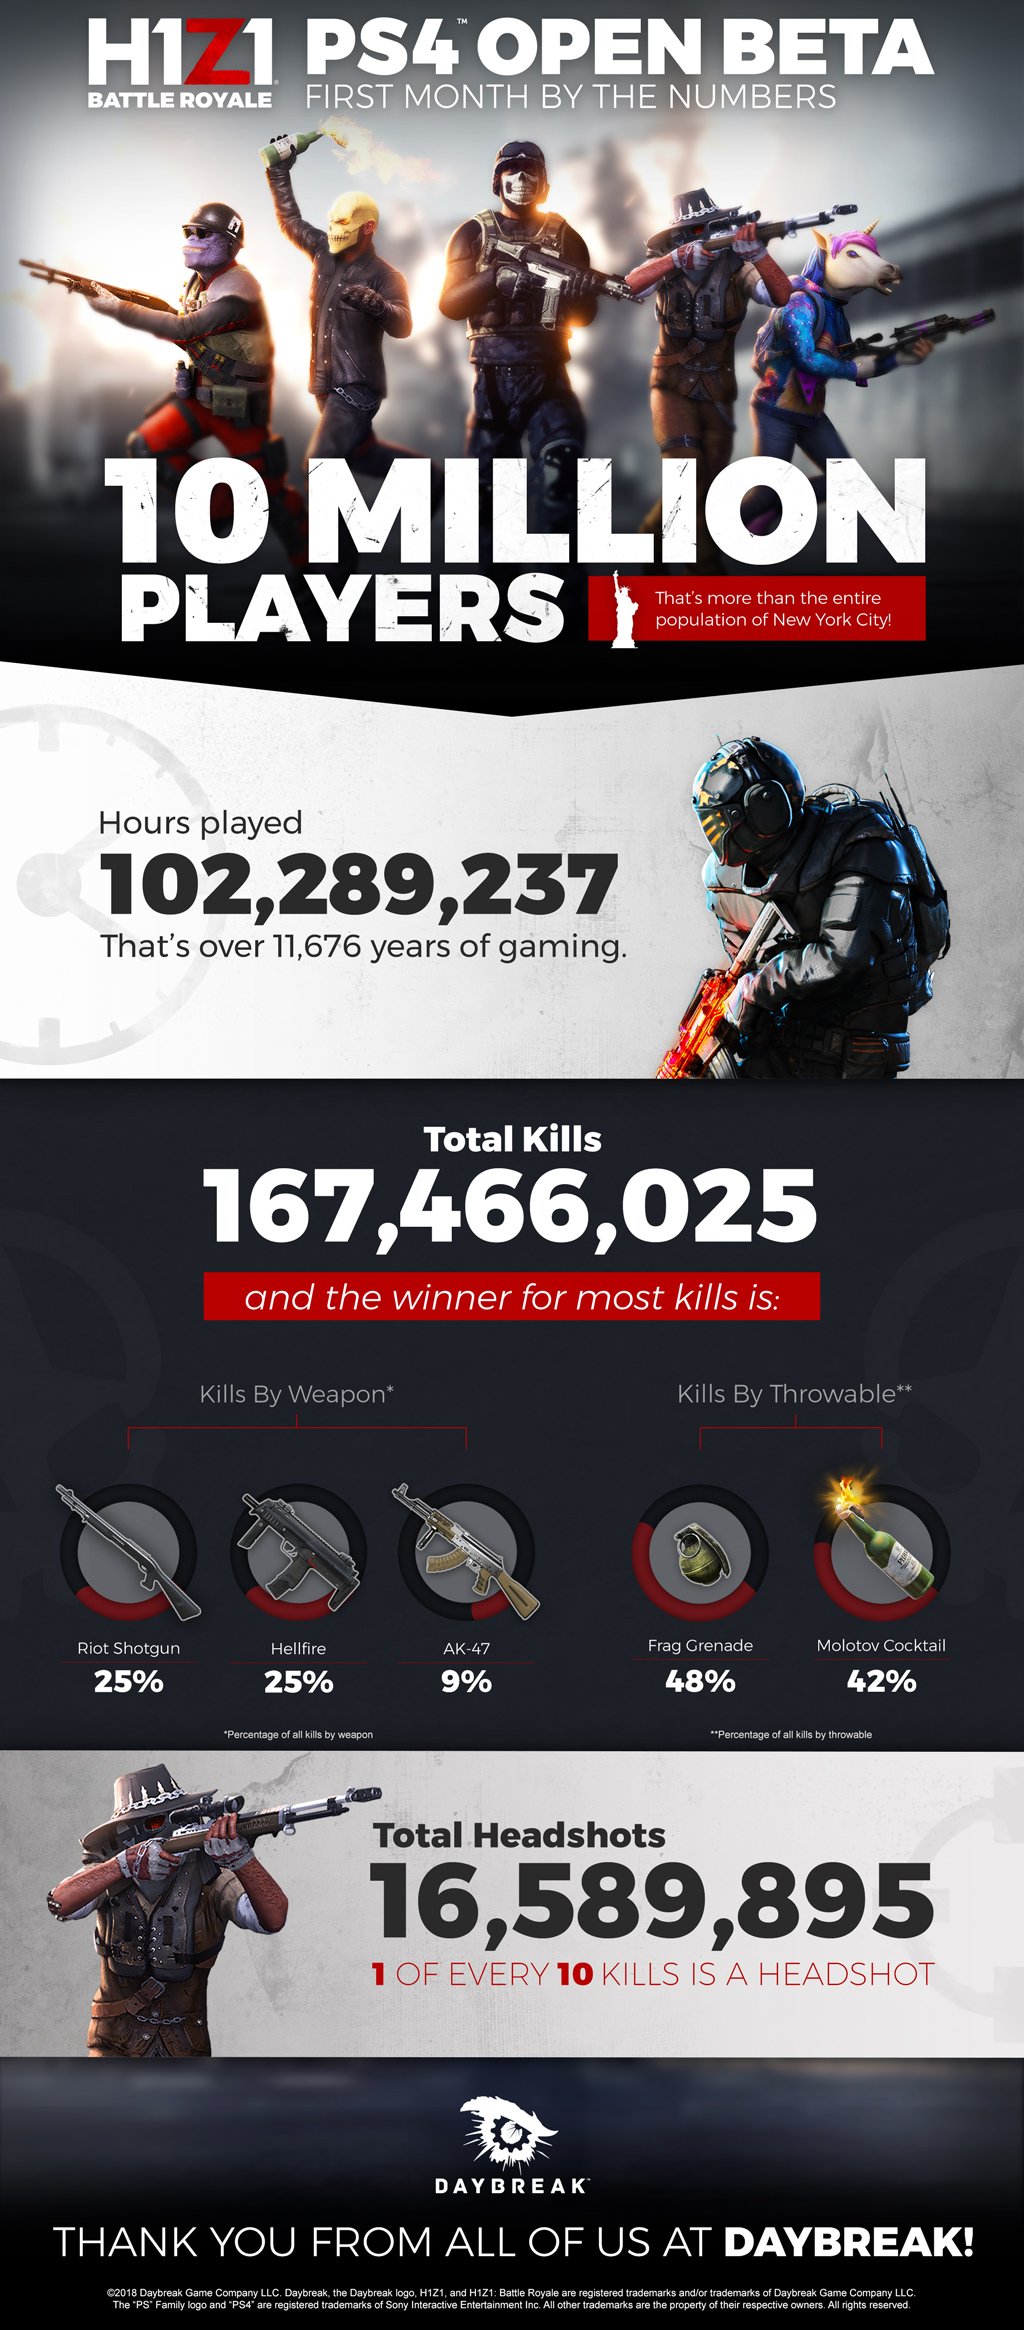 H1Z1 player count